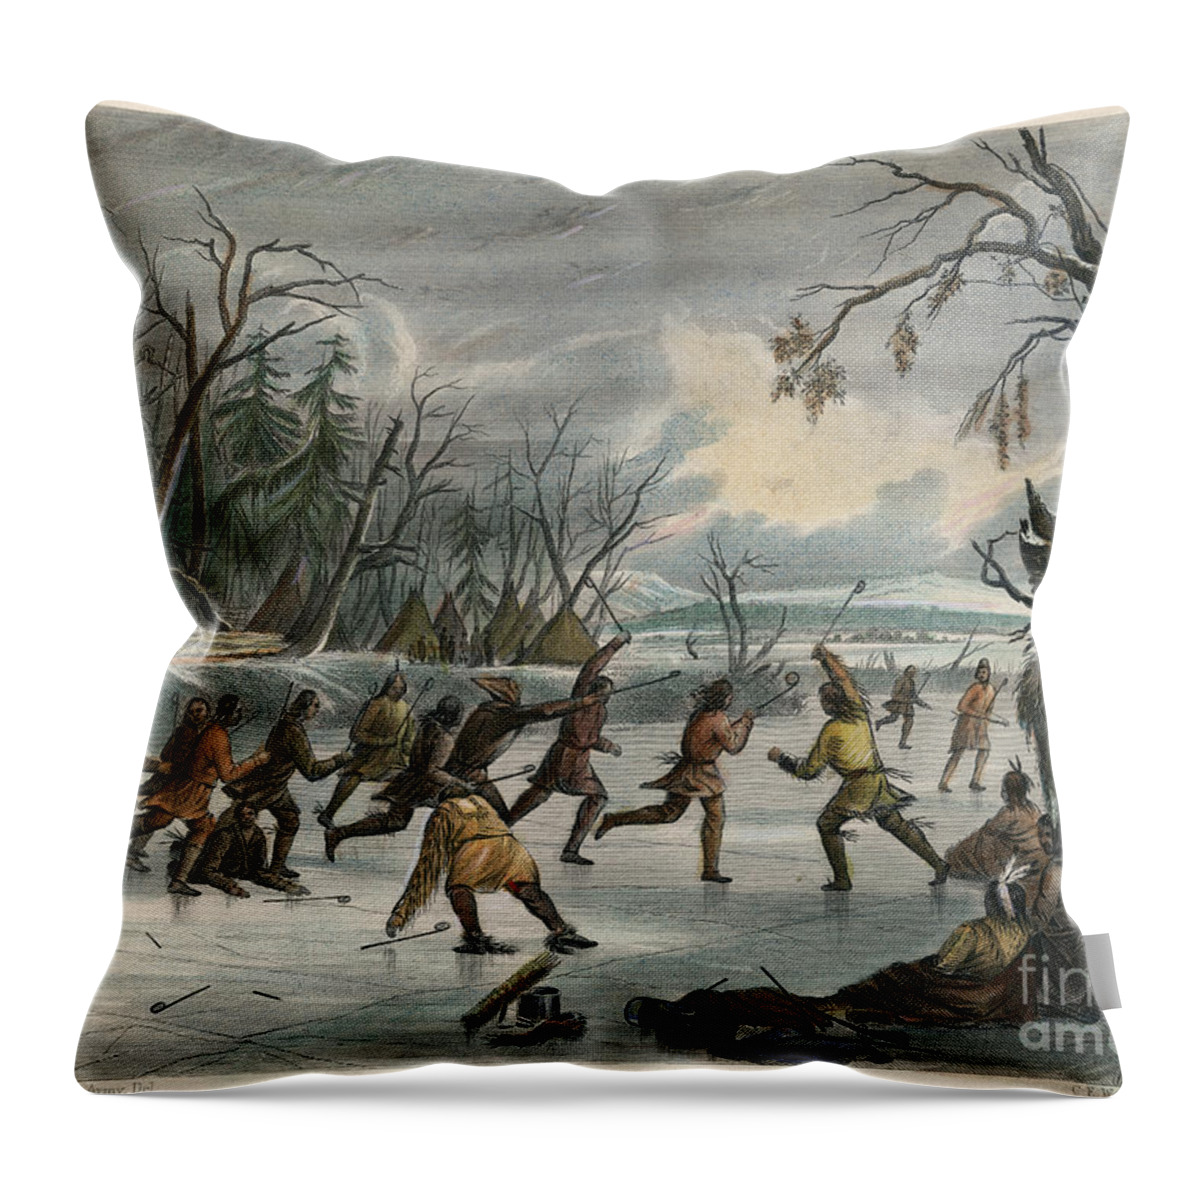 1855 Throw Pillow featuring the photograph Native American Lacrosse Game, 1855 by Granger